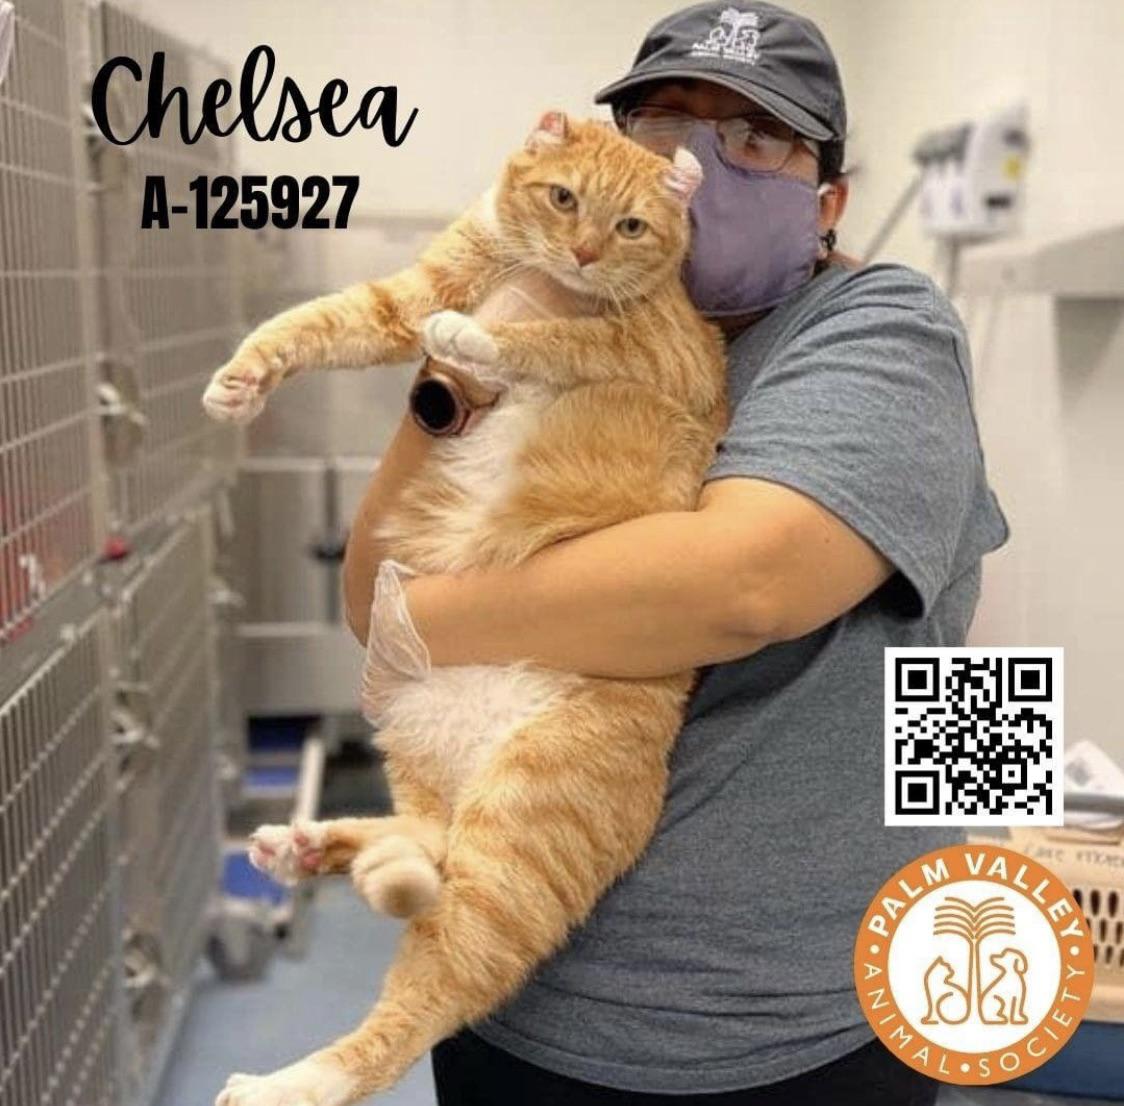 Chelsea is up for adoption at my local shelter!